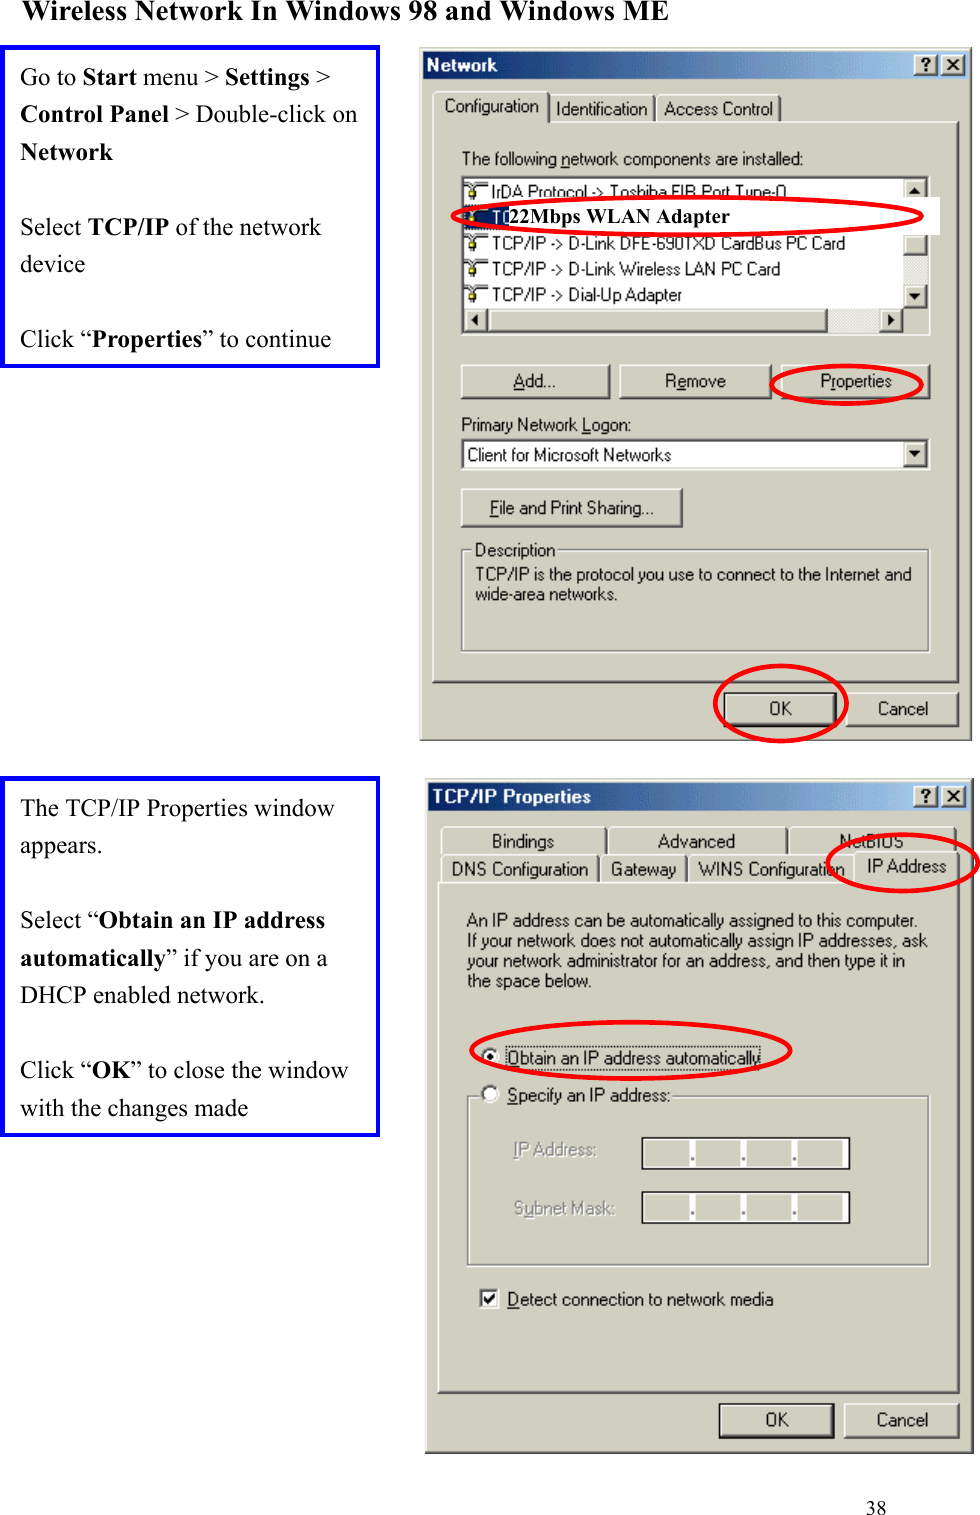 38Wireless Network In Windows 98 and Windows METhe TCP/IP Properties windowappears.Select “Obtain an IP addressautomatically” if you are on aDHCP enabled network.Click “OK” to close the windowwith the changes madeGo to Start menu &gt; Settings &gt;Control Panel &gt; Double-click onNetworkSelect TCP/IP of the networkdeviceClick “Properties” to continue22Mbps WLAN Adapter